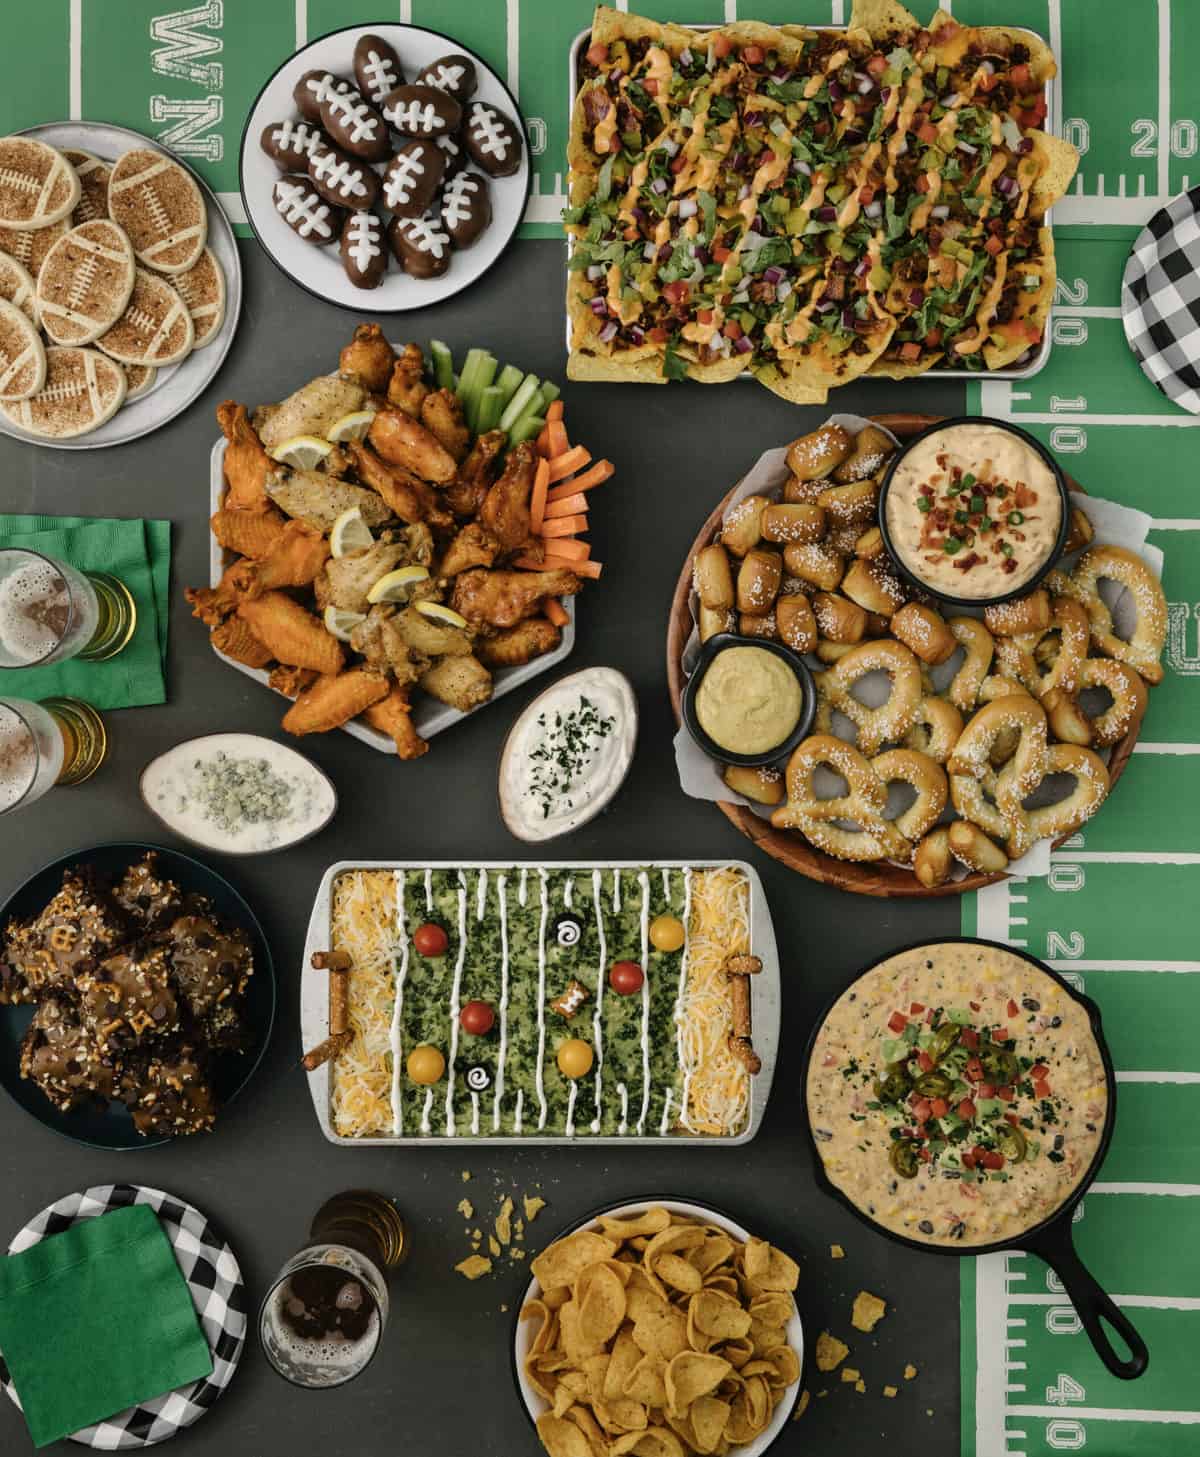 The Big Game Spread by The BakerMama